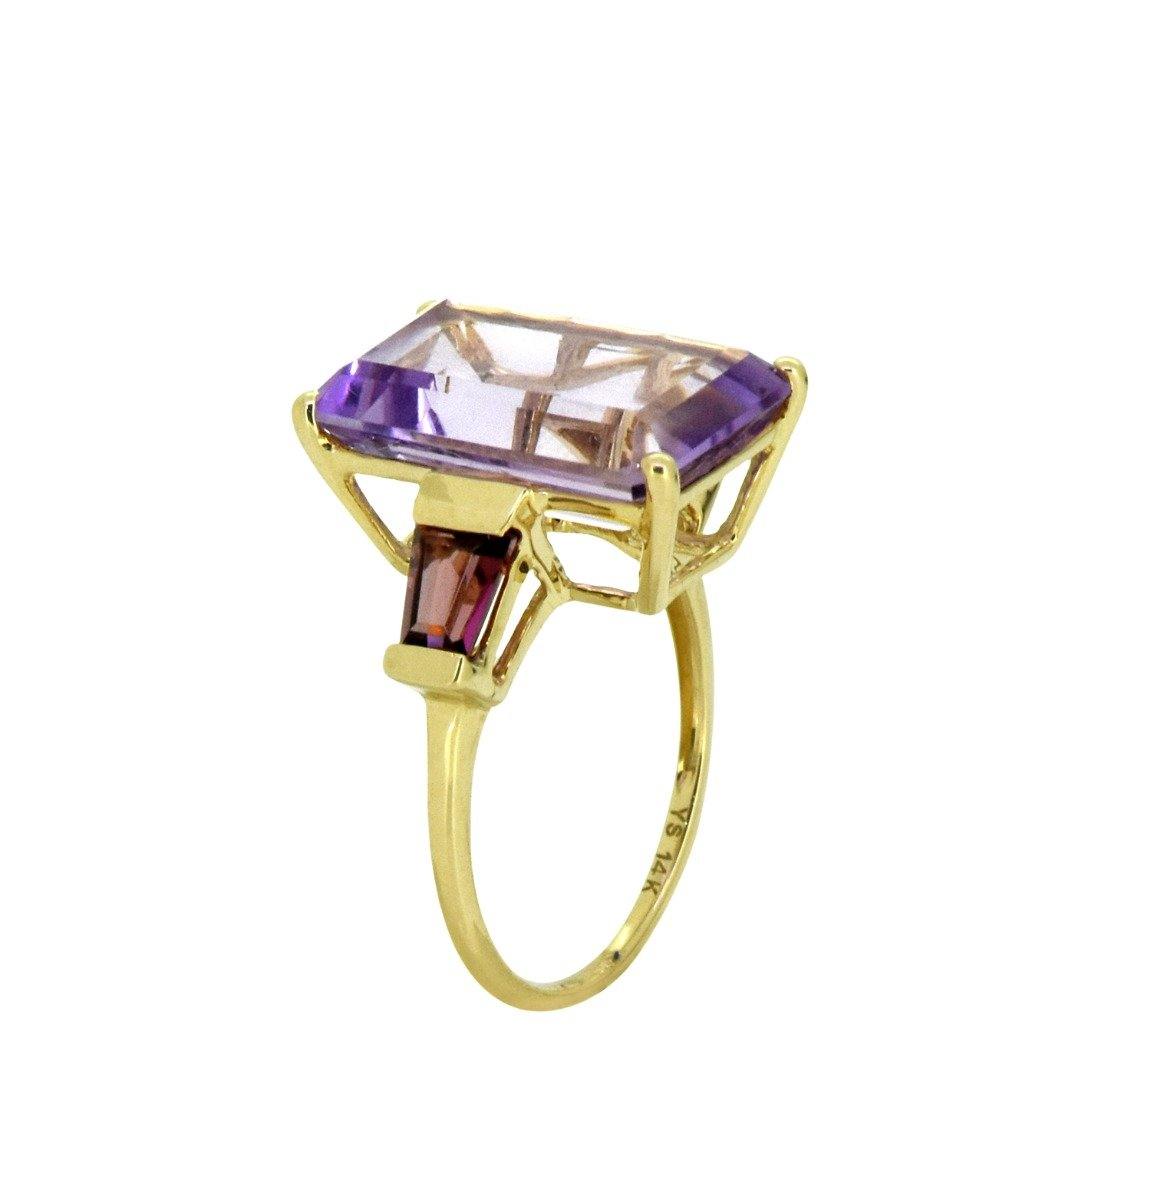 9.63 Ct Pink Amethyst Solid 14k Yellow Gold Ring Jewelry - YoTreasure